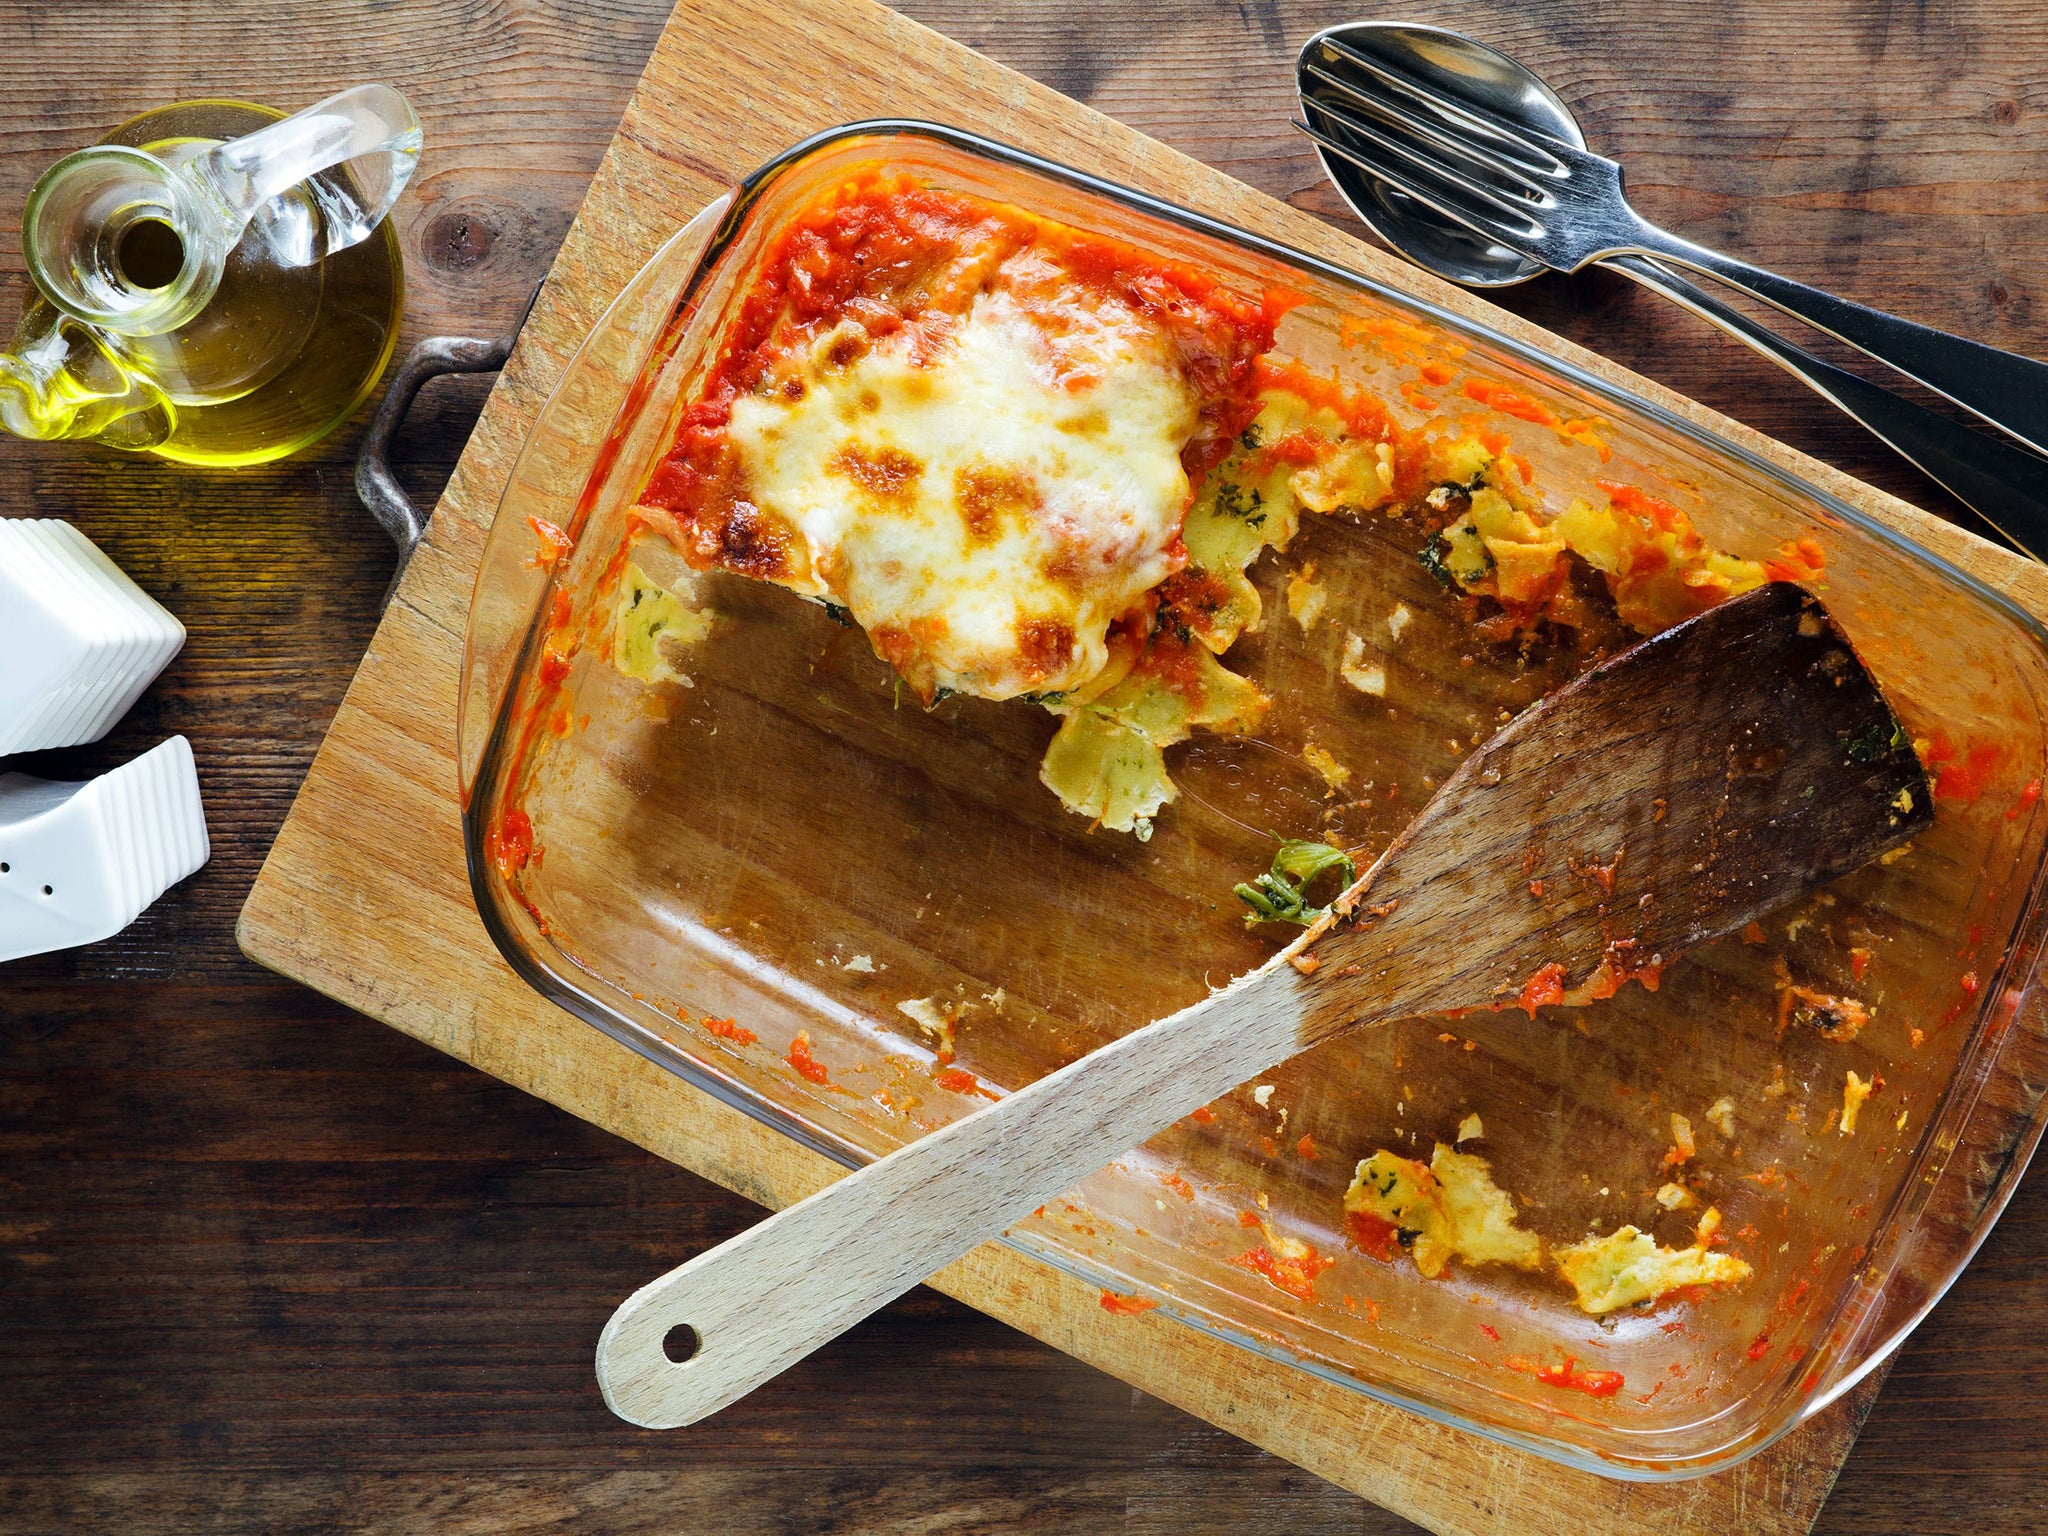 Plan your meals in advance to save on spending and freeze leftovers in portions to make it easier to reheat